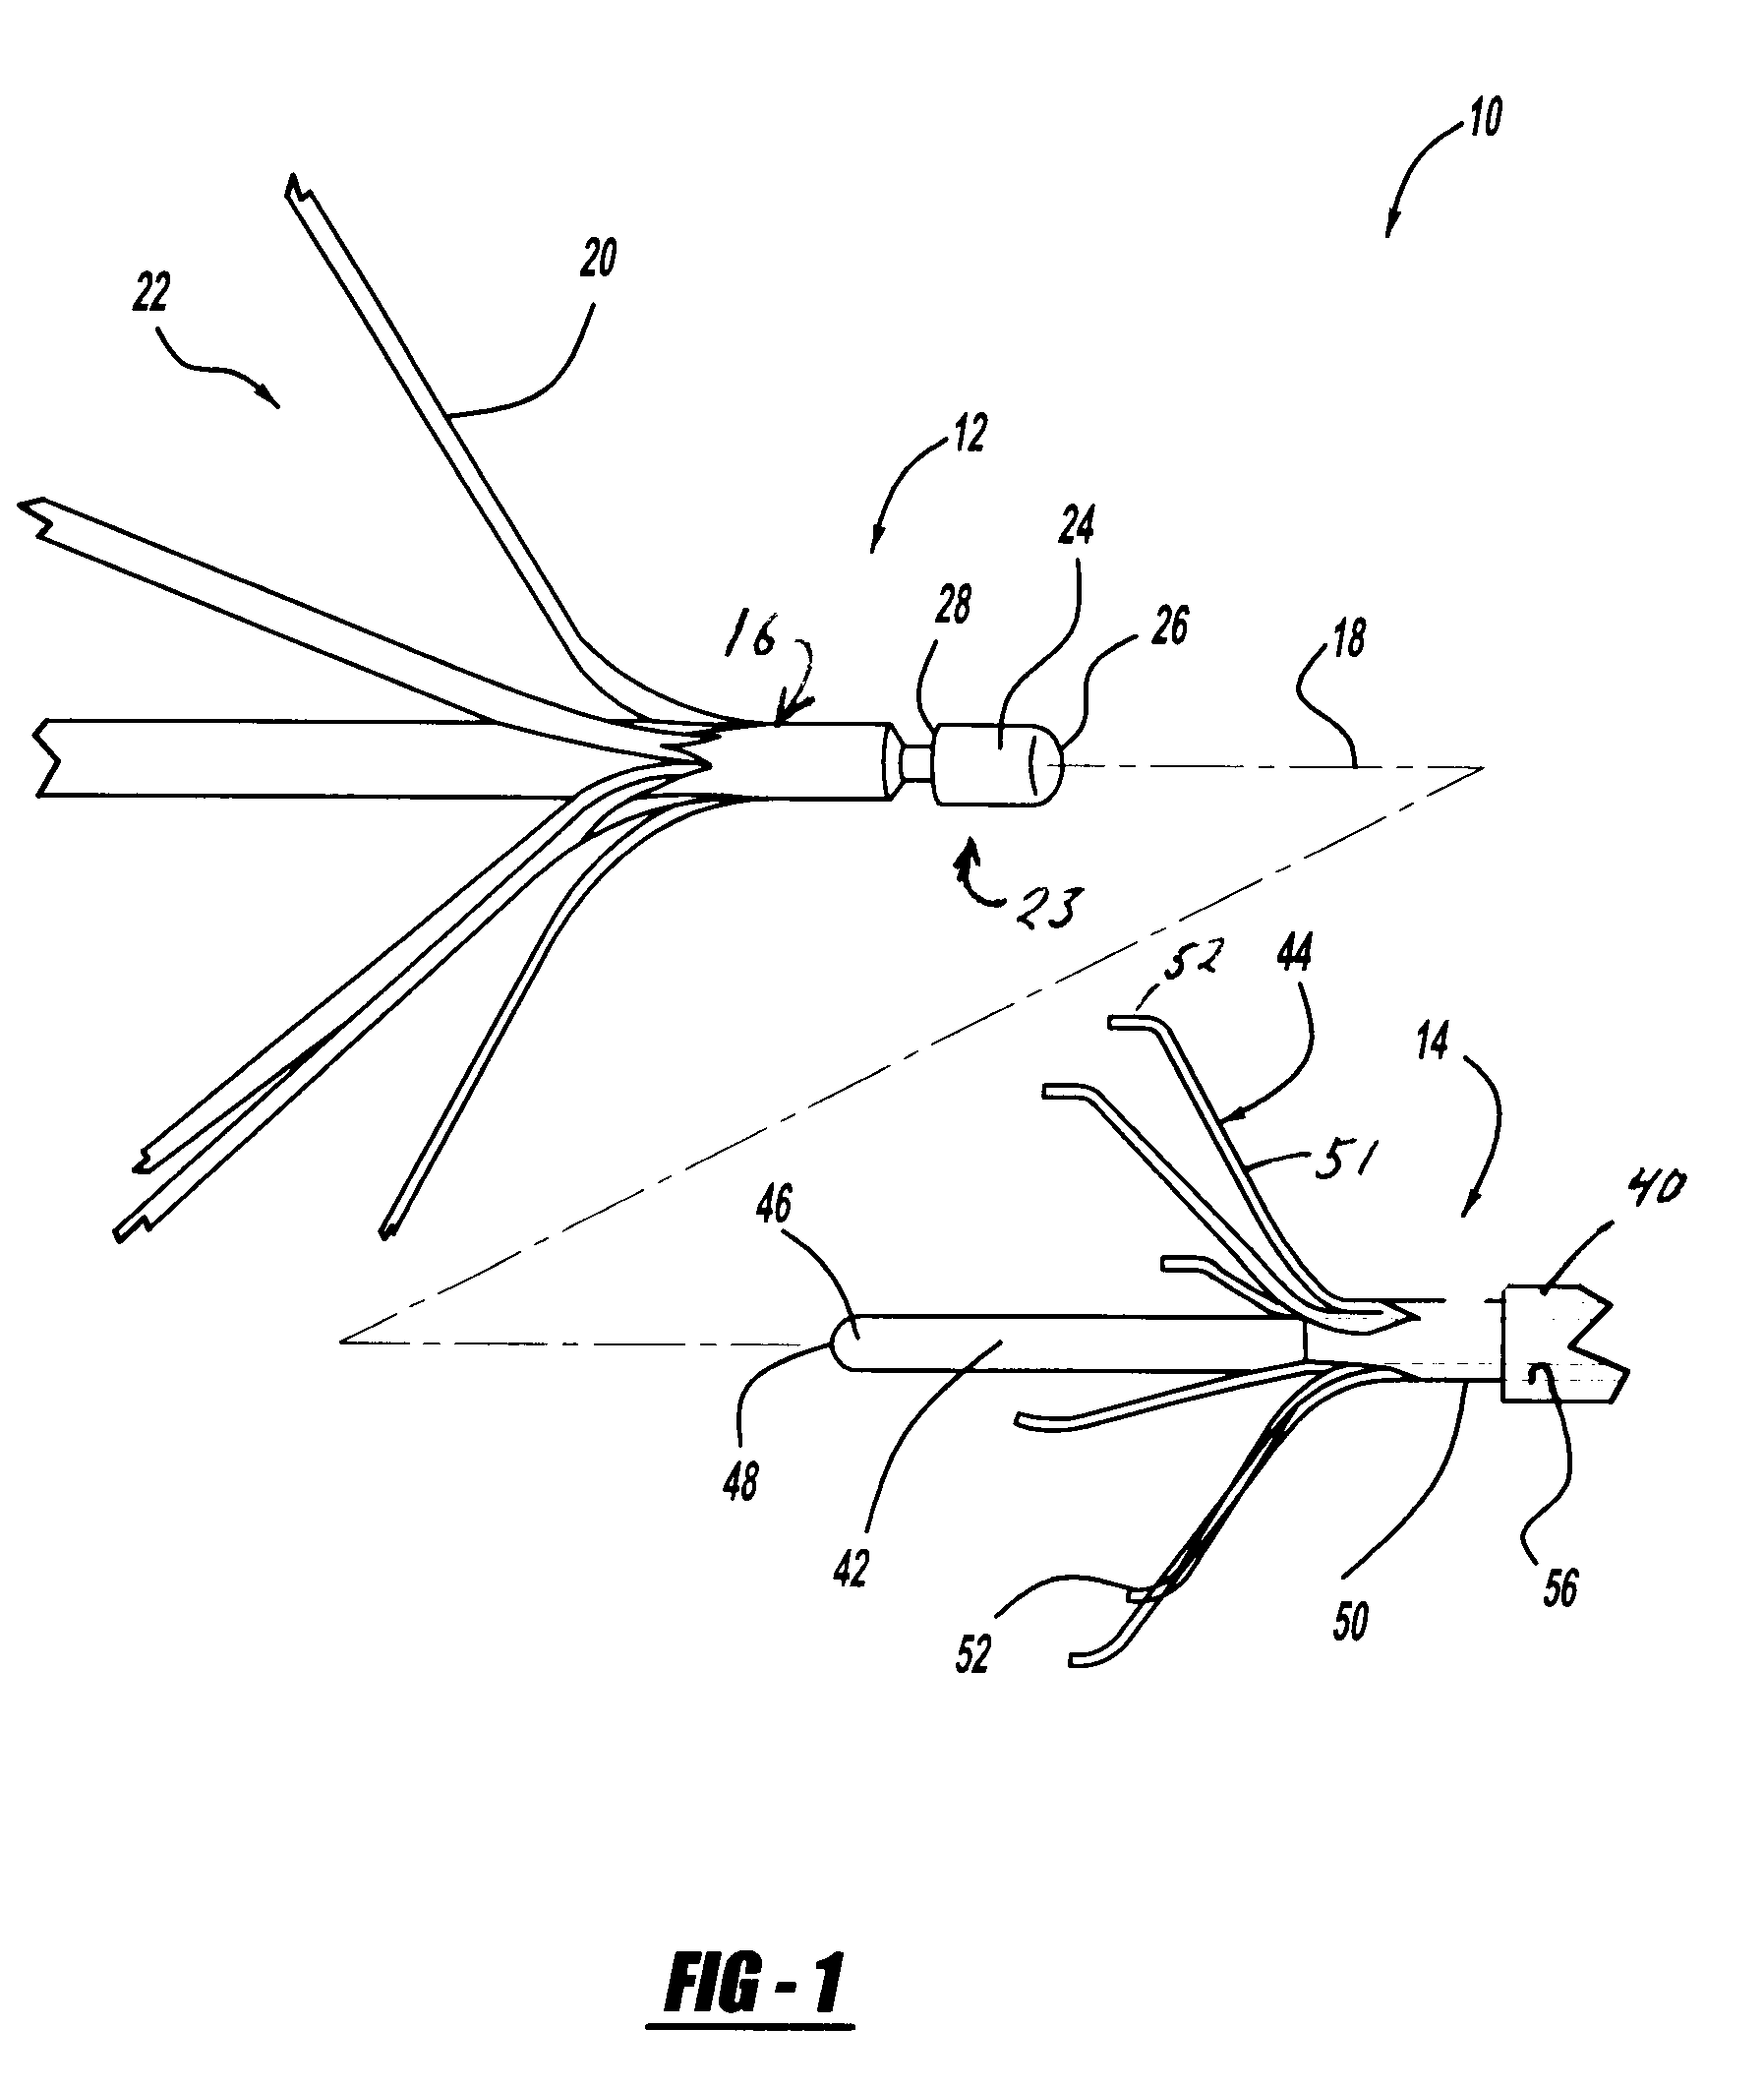 System and method for retrieval of a medical filter